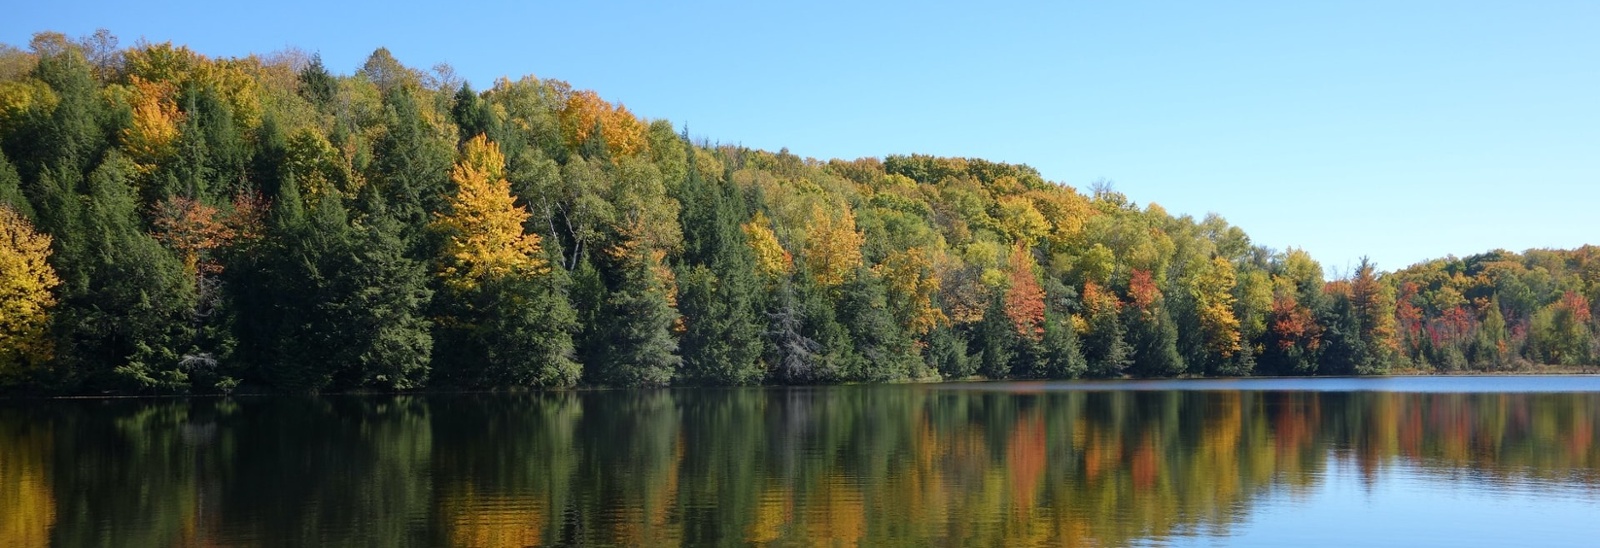 calm lake with fall leaves on the trees-1